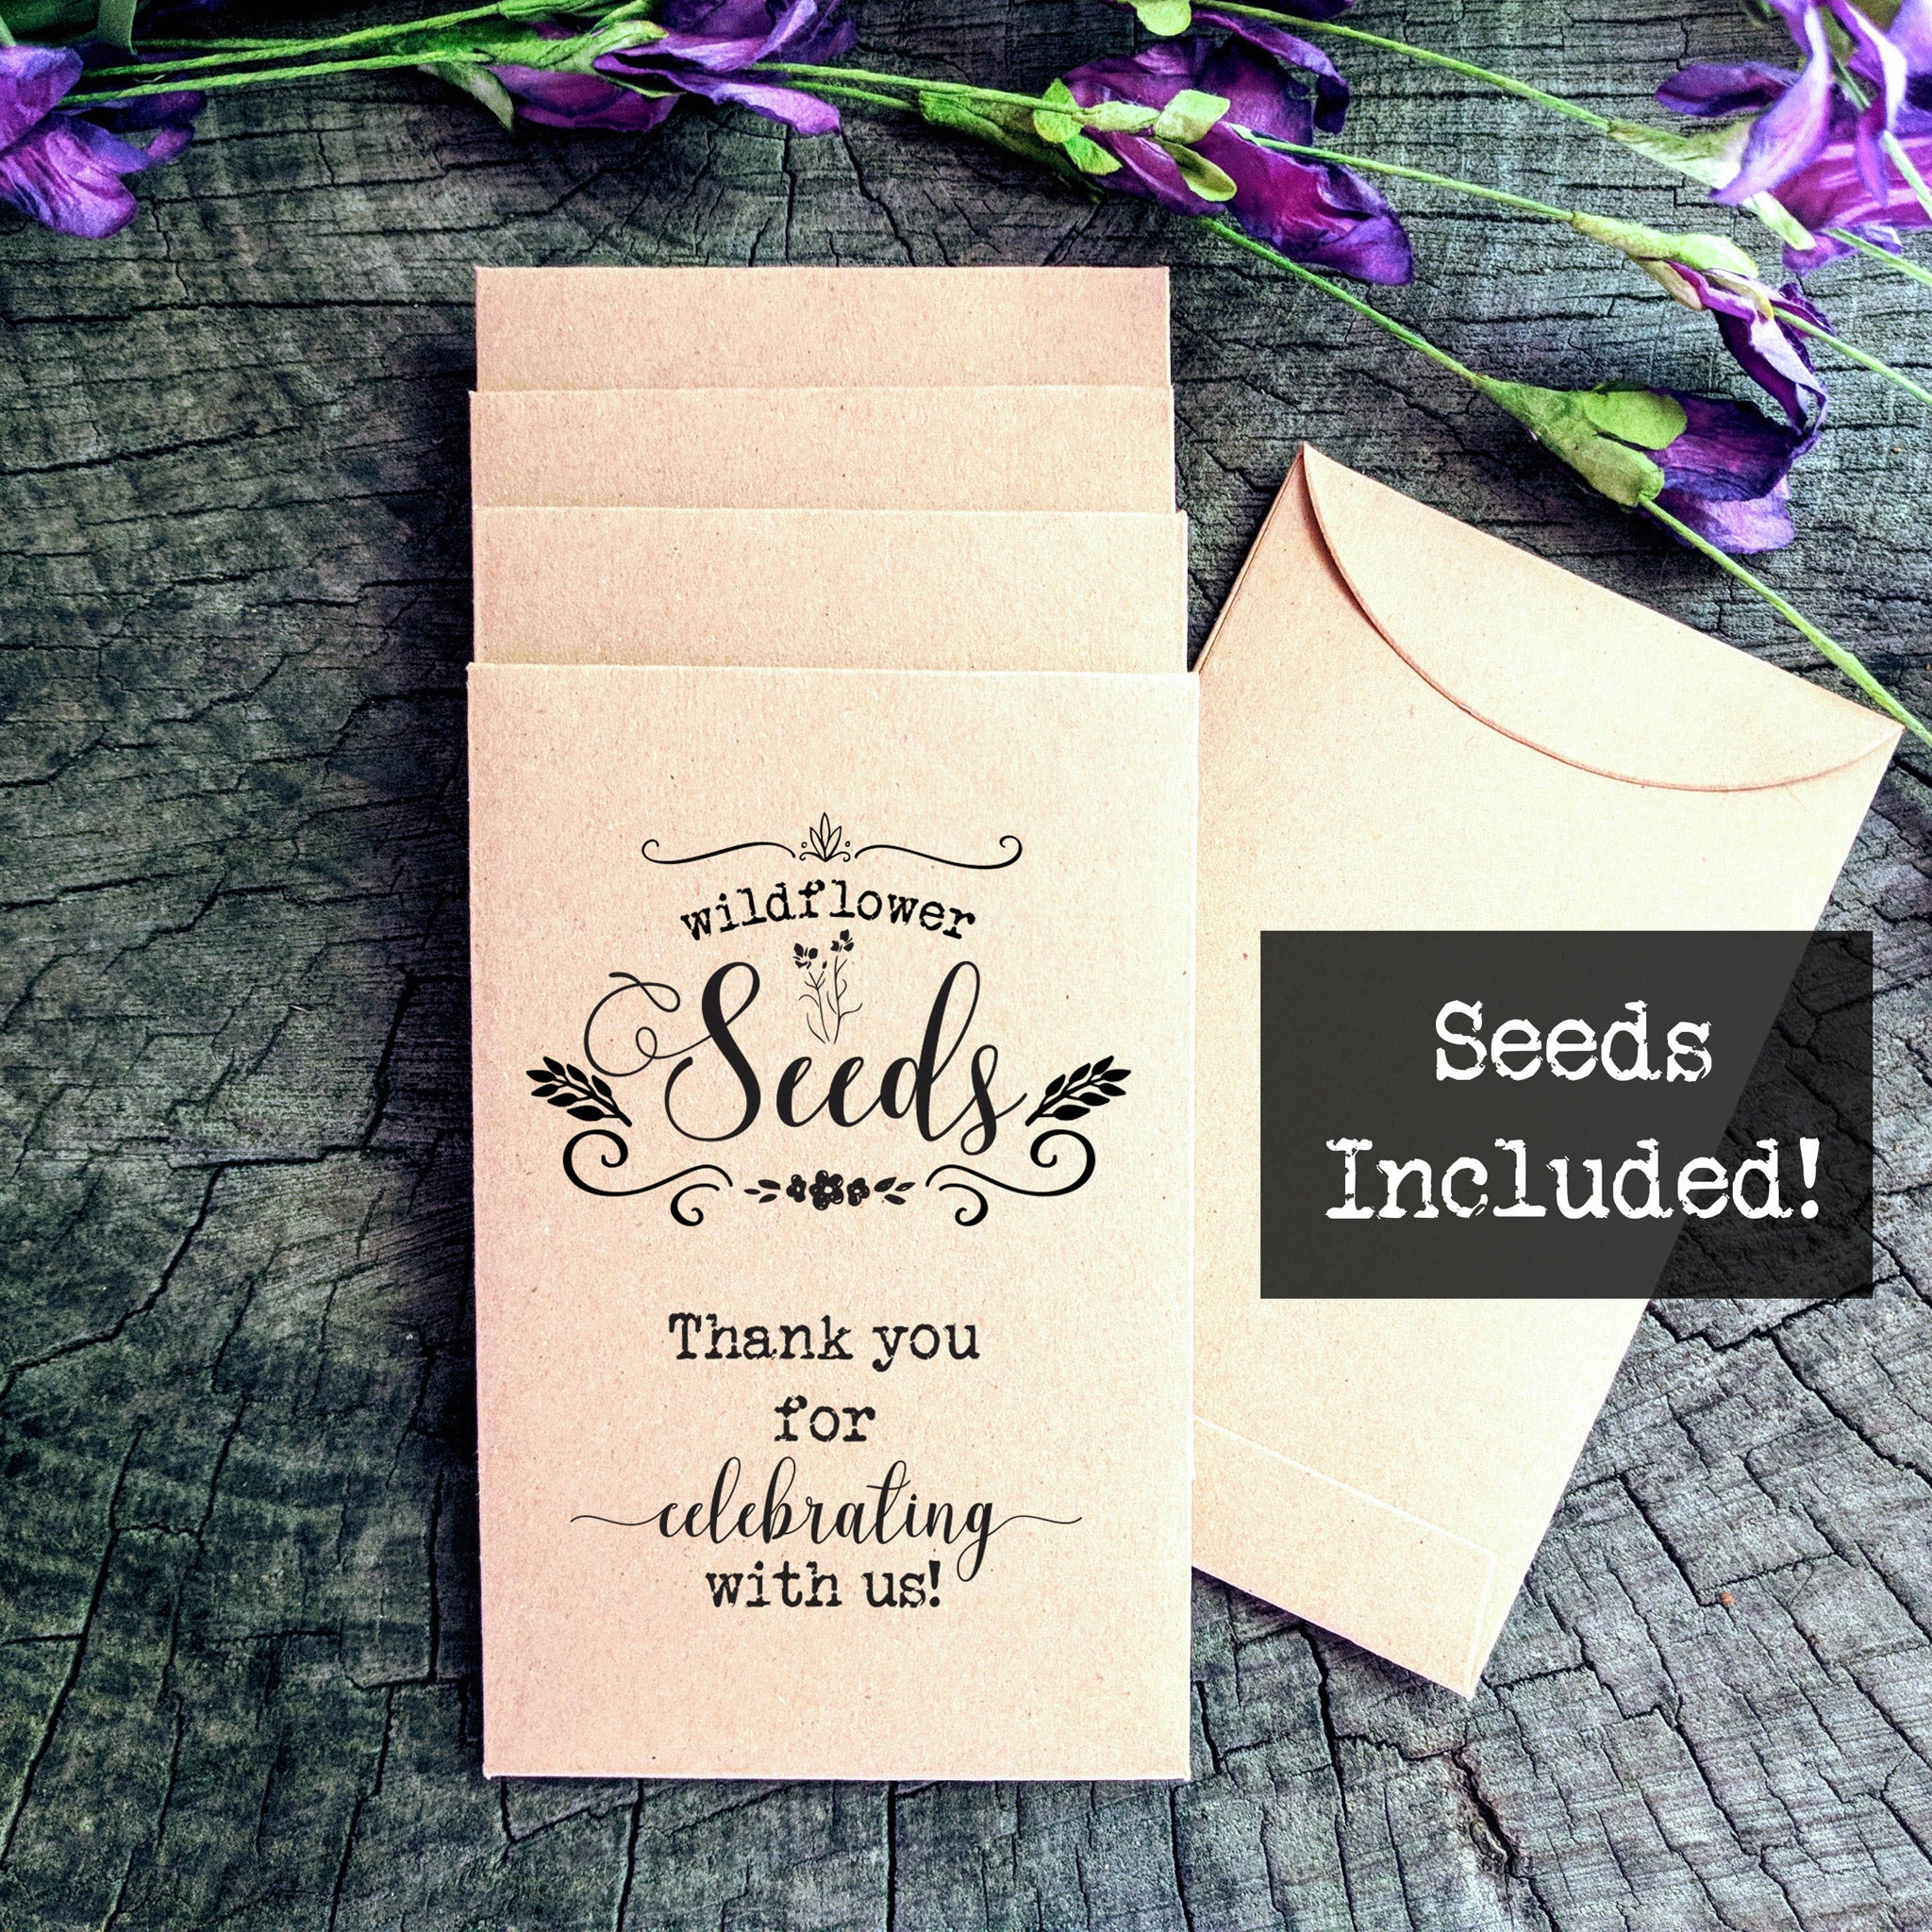 Wildflowers from Our Wedding Seed Packet